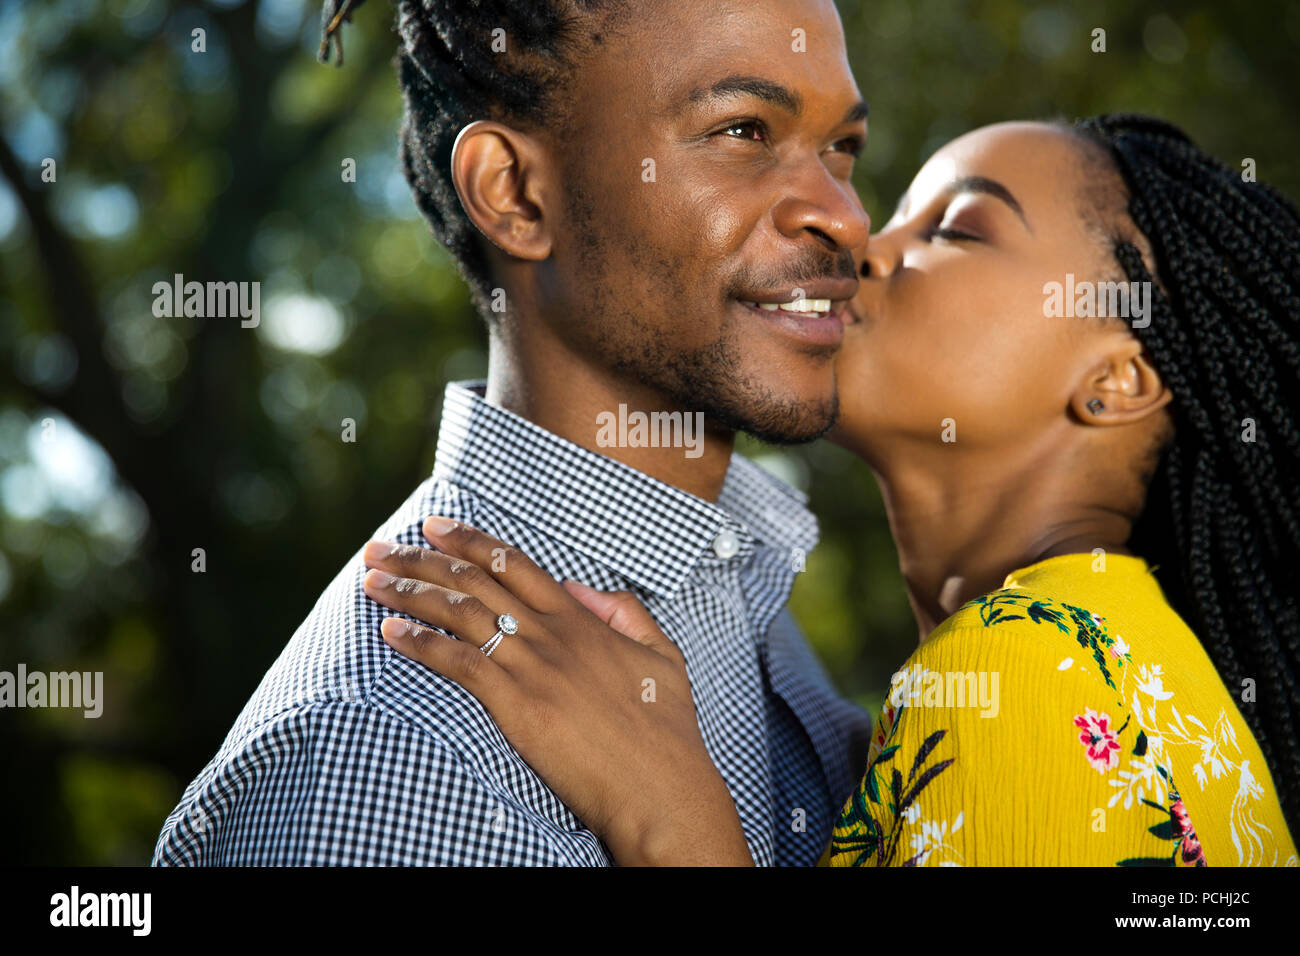 African woman kissing African man on cheek Stock Photo